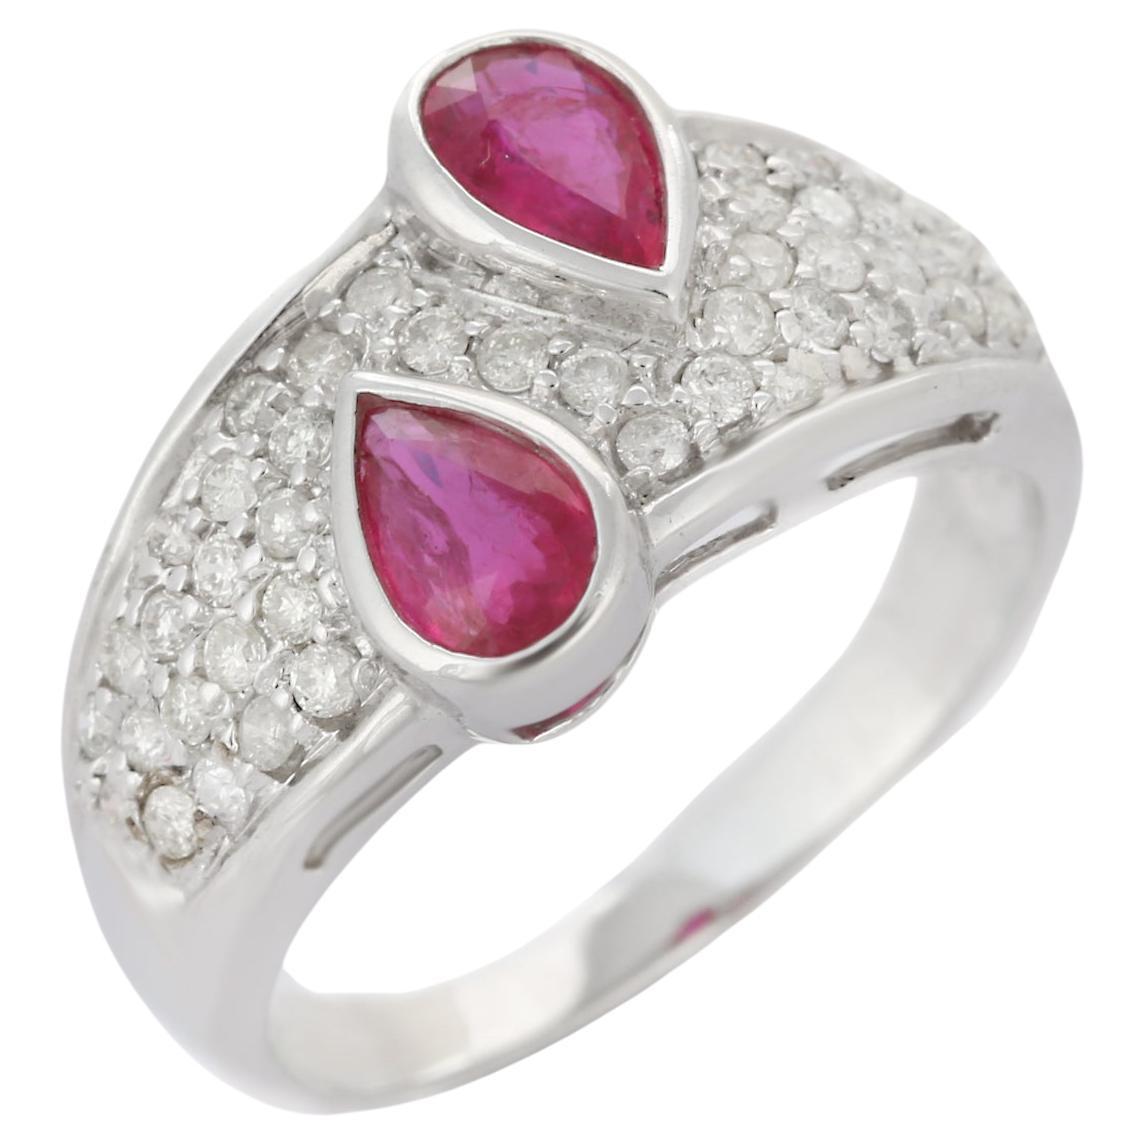 For Sale:  Pear Cut Ruby and Diamond Cocktail Wedding Ring in 18K White Gold